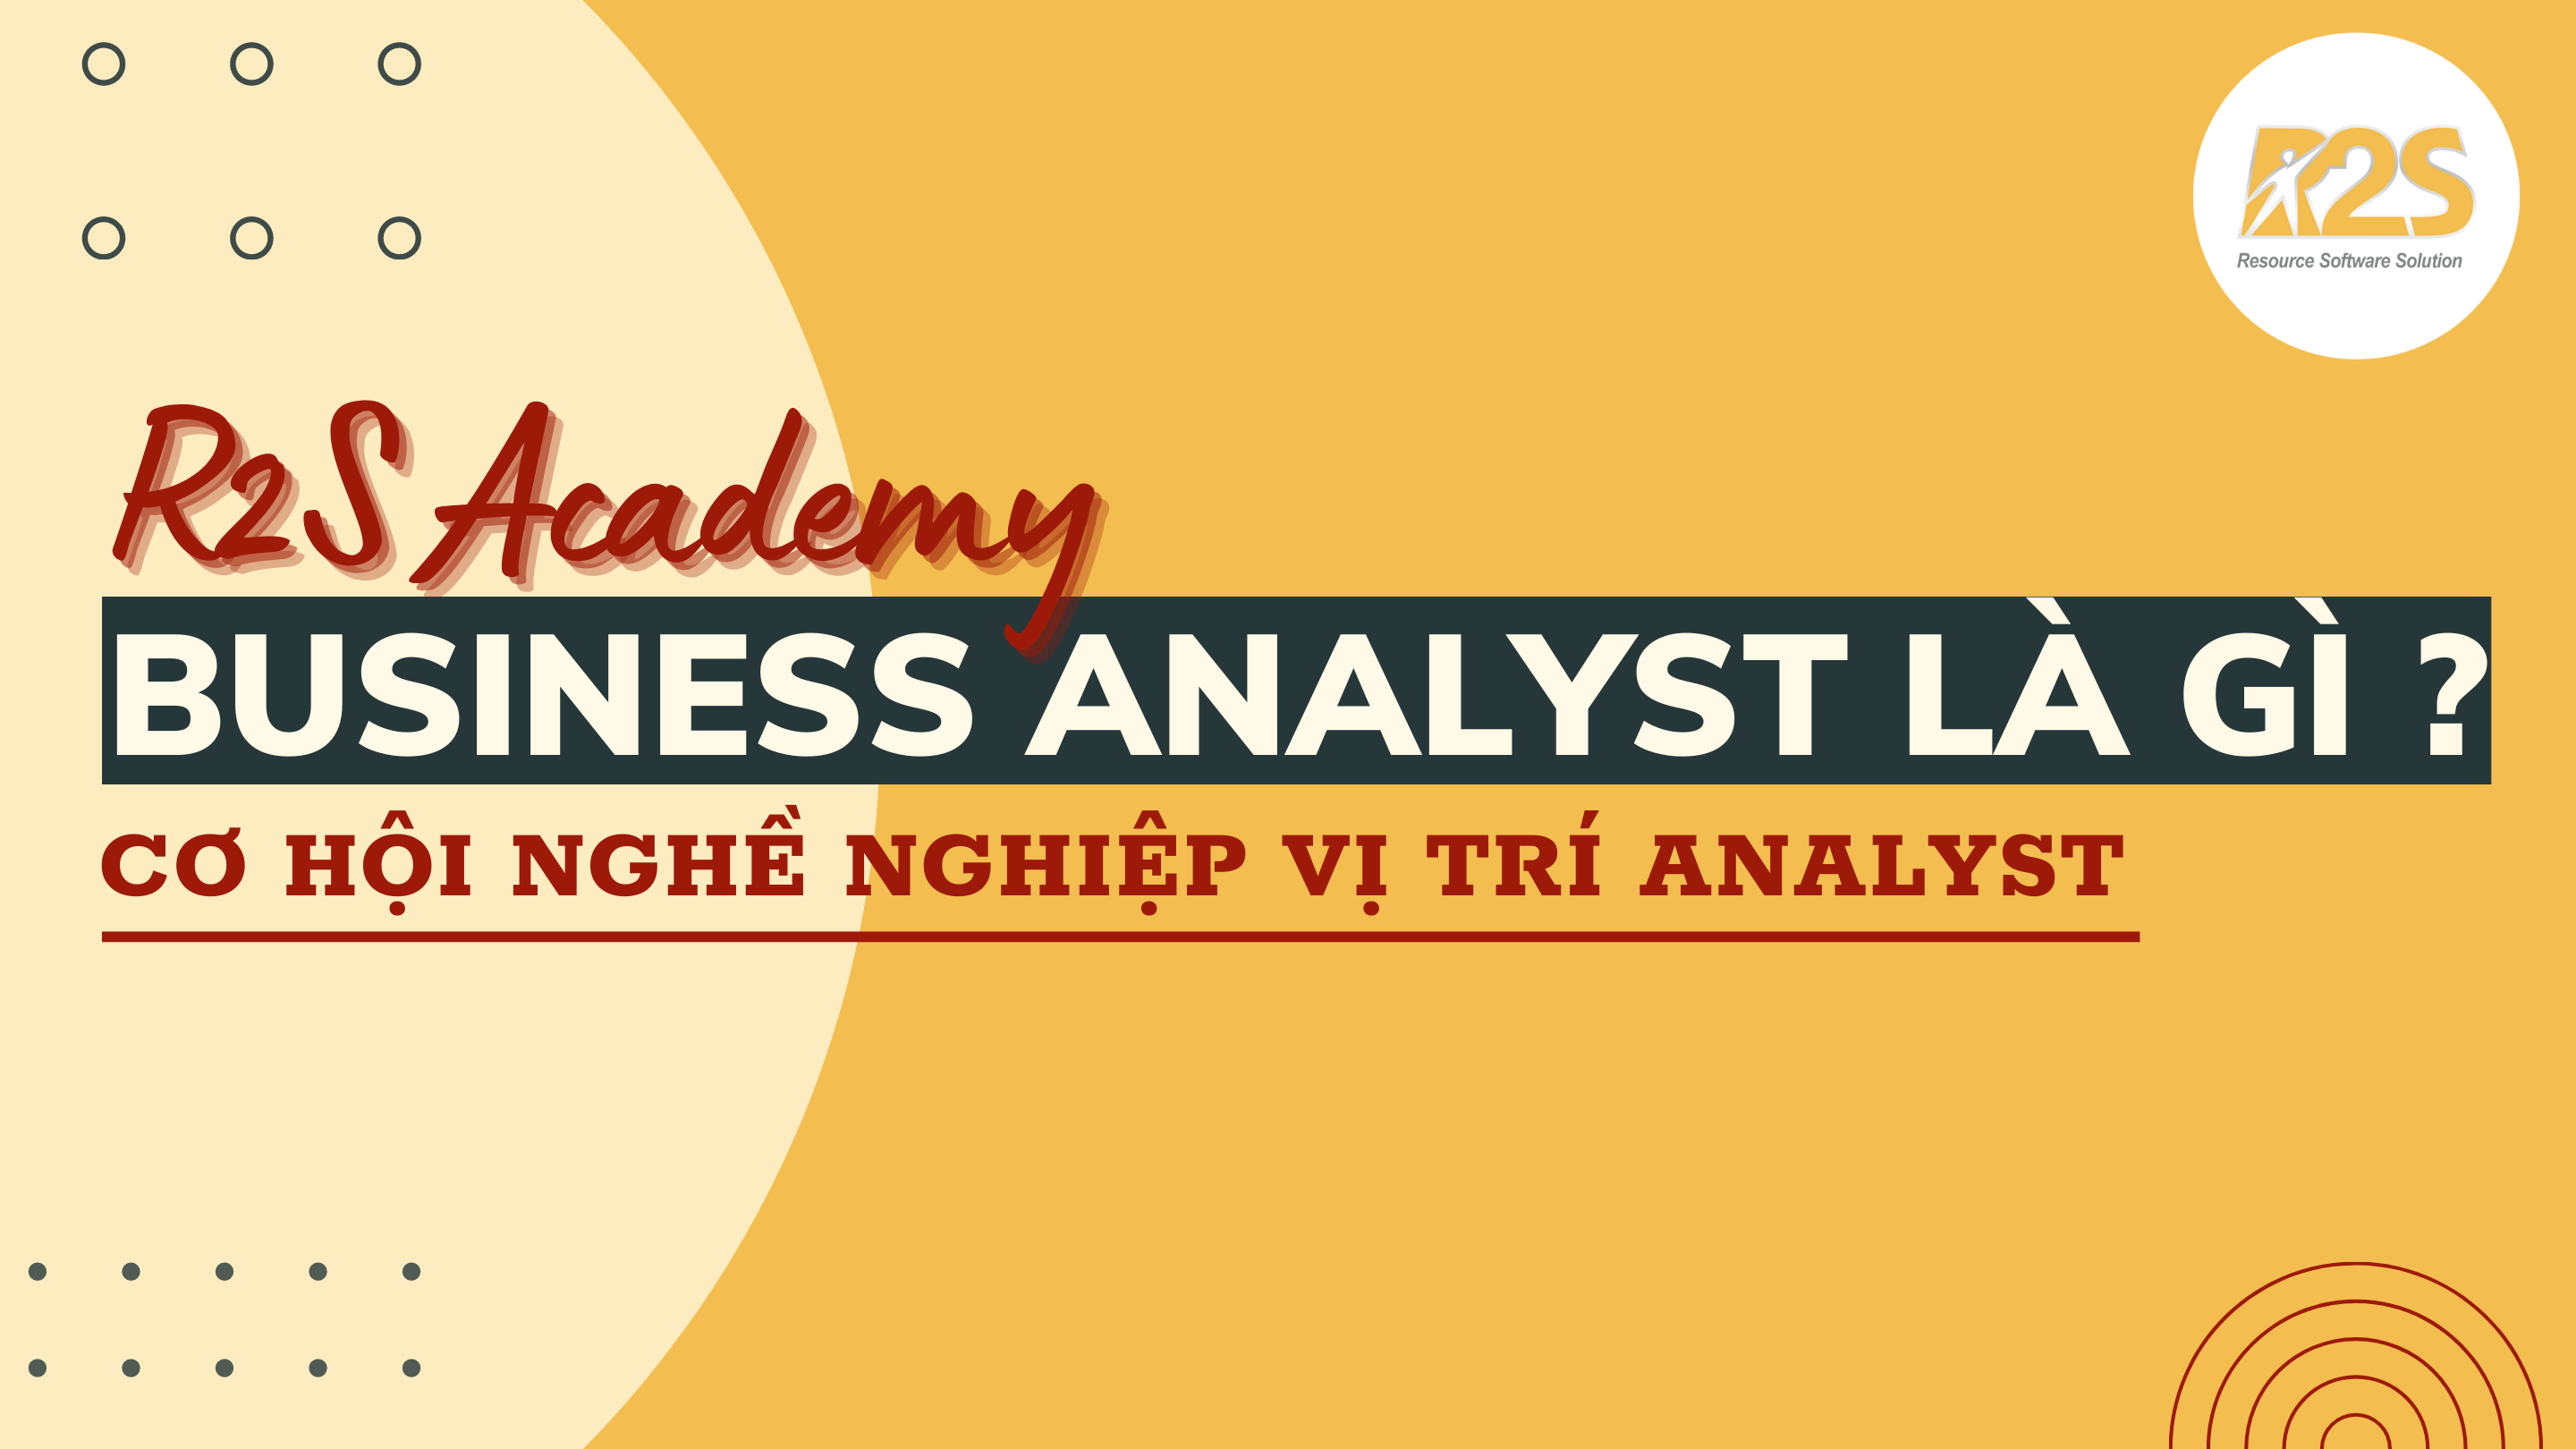 BUSINESS-ANALYST-LA-GI-CO-HOI-NGHE-NGHIEP-VI-TRI-ANALYST-R2S-ACADEMY